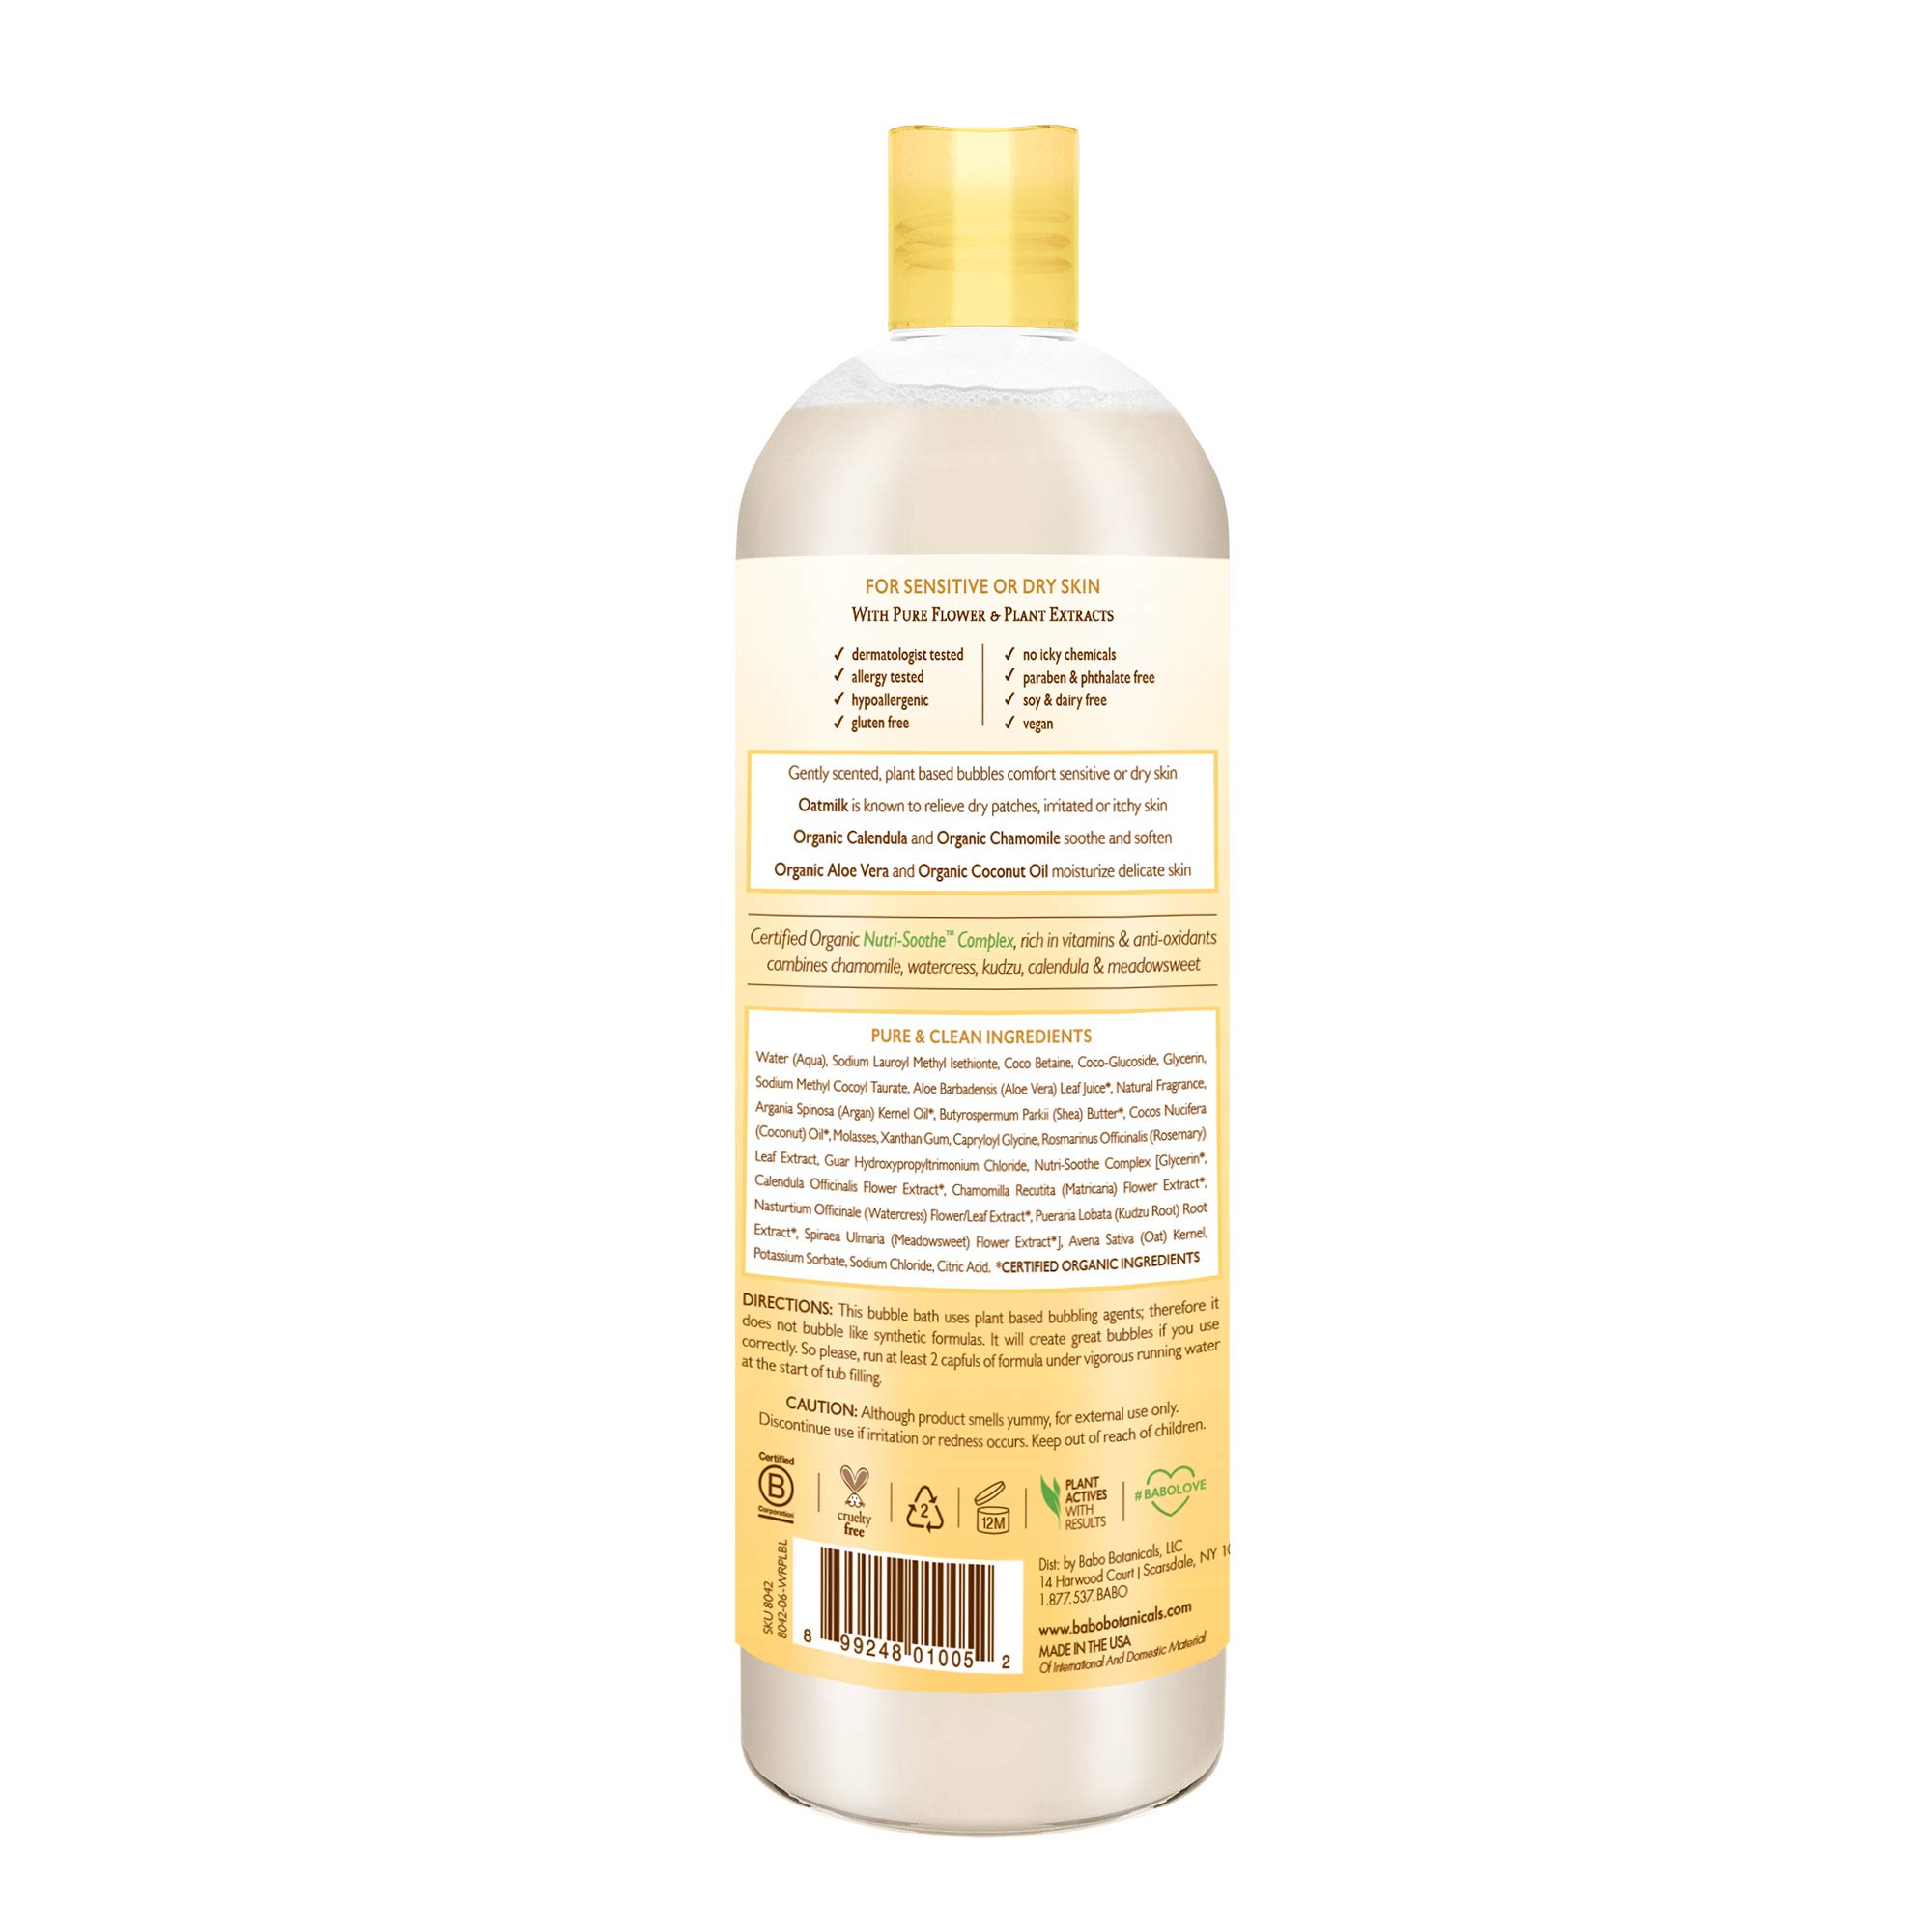 Babo Botanicals Moisturizing Plant-Based 2-in-1 Bubble Bath & Wash - with Organic Calendula & Natural Oat Milk - for Babies, Kids & Adults with Sensitive Skin - Hypoallergenic & Vegan